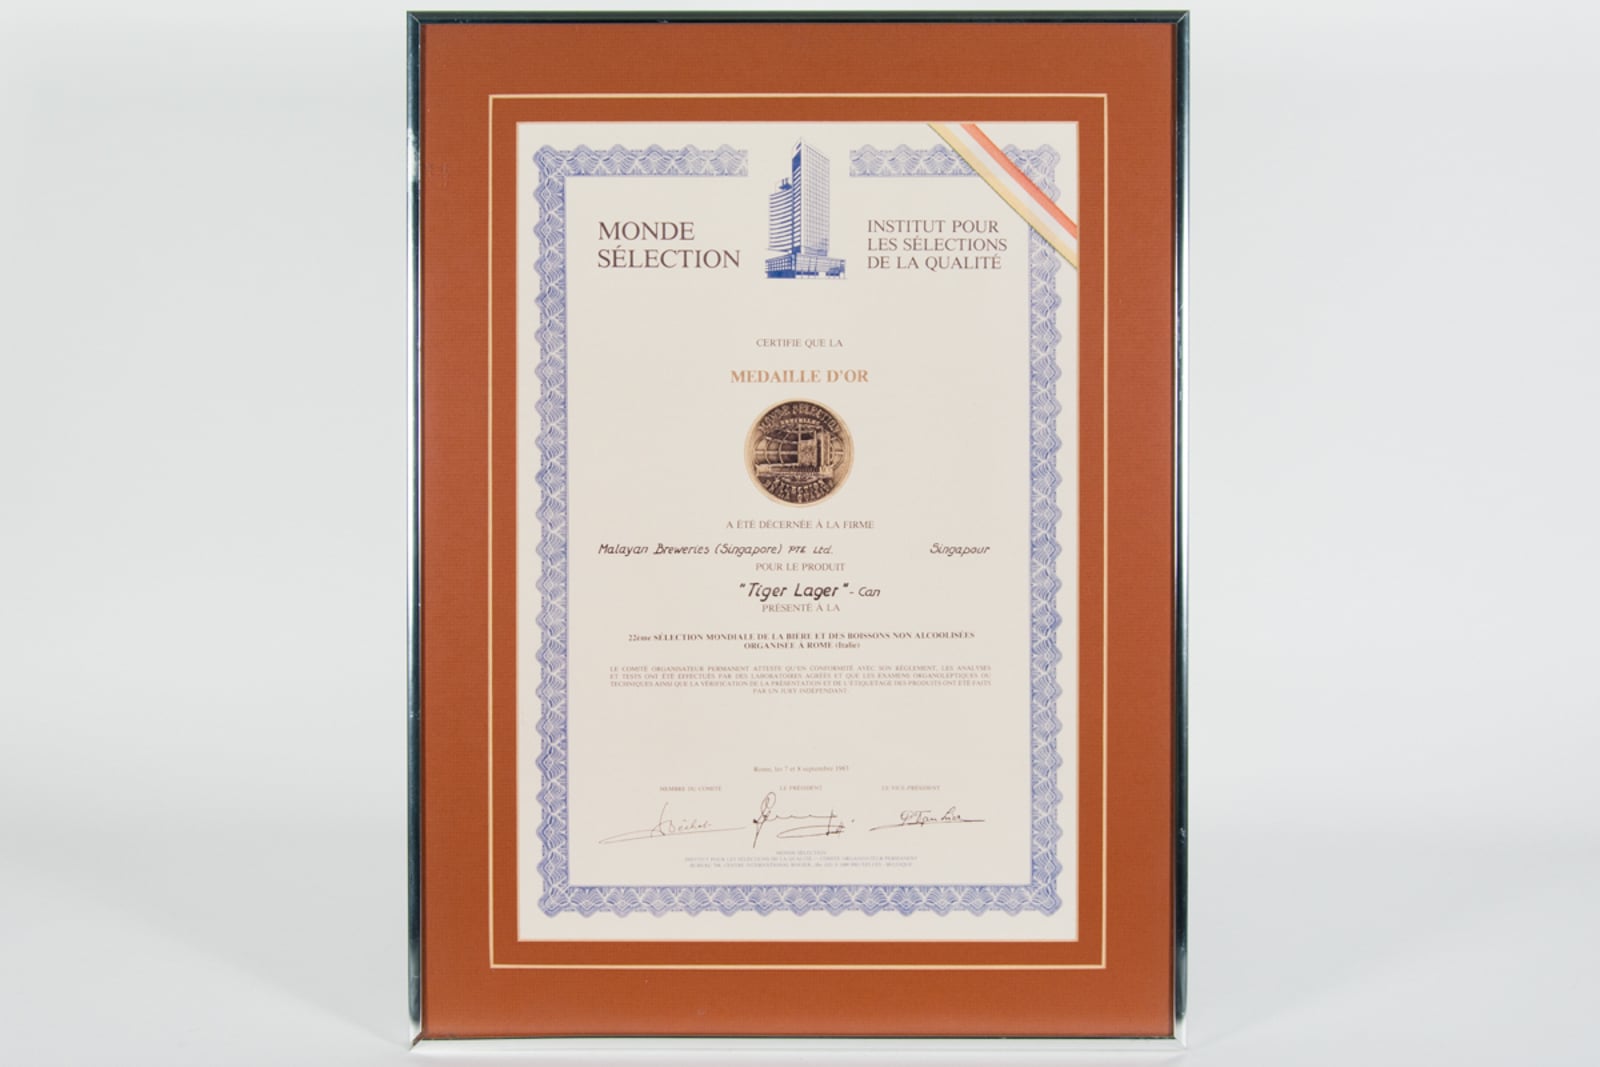 Tiger Lager (Can) Médaille d'Or, Monde Selection Certificate 1983